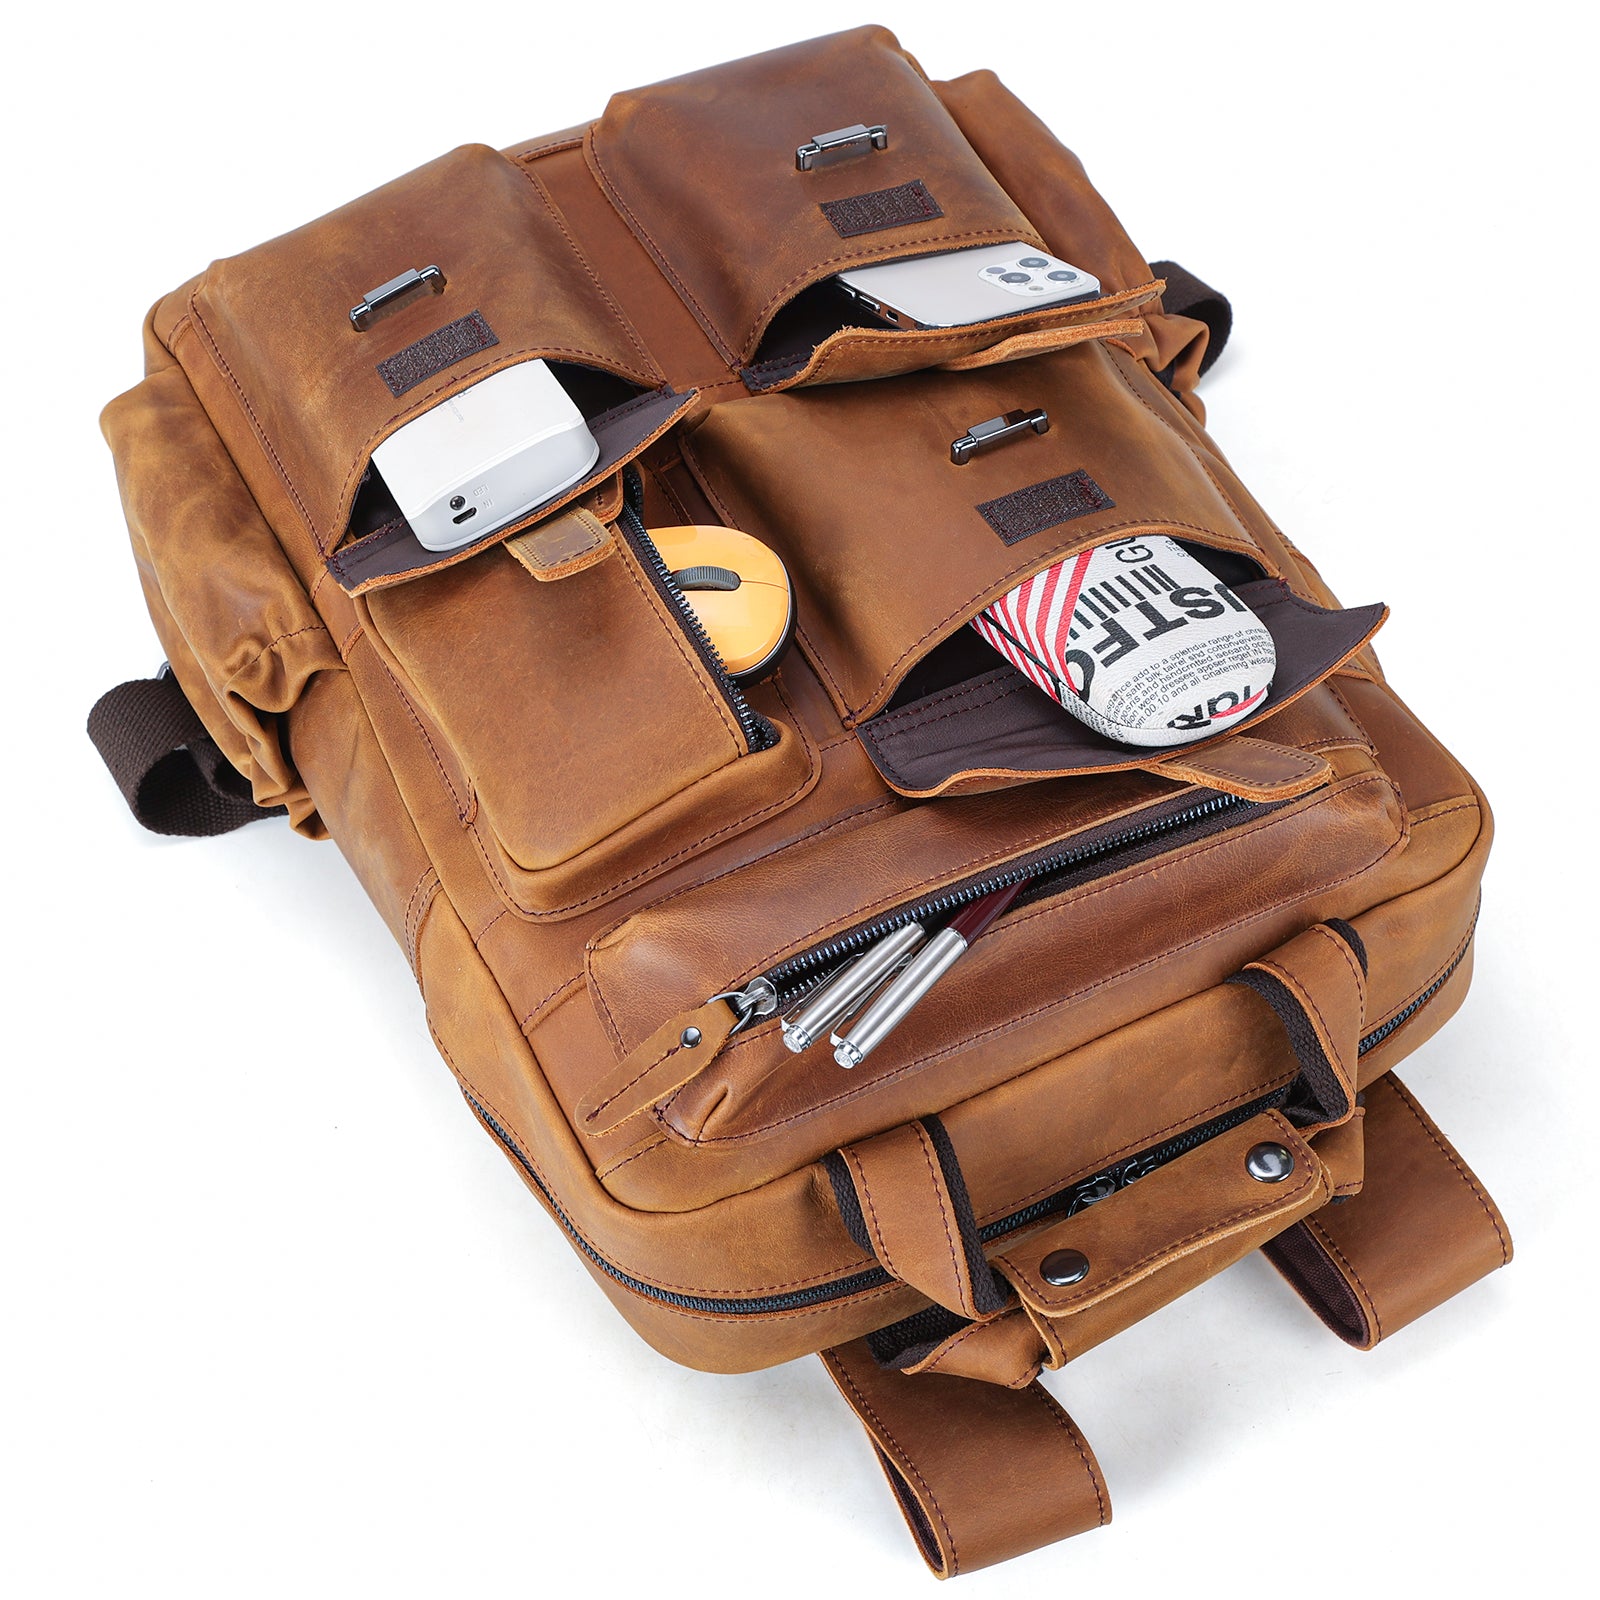 Polare Cowhide Leather Multiple Laptop Backpack (Light Brown, Pockets)